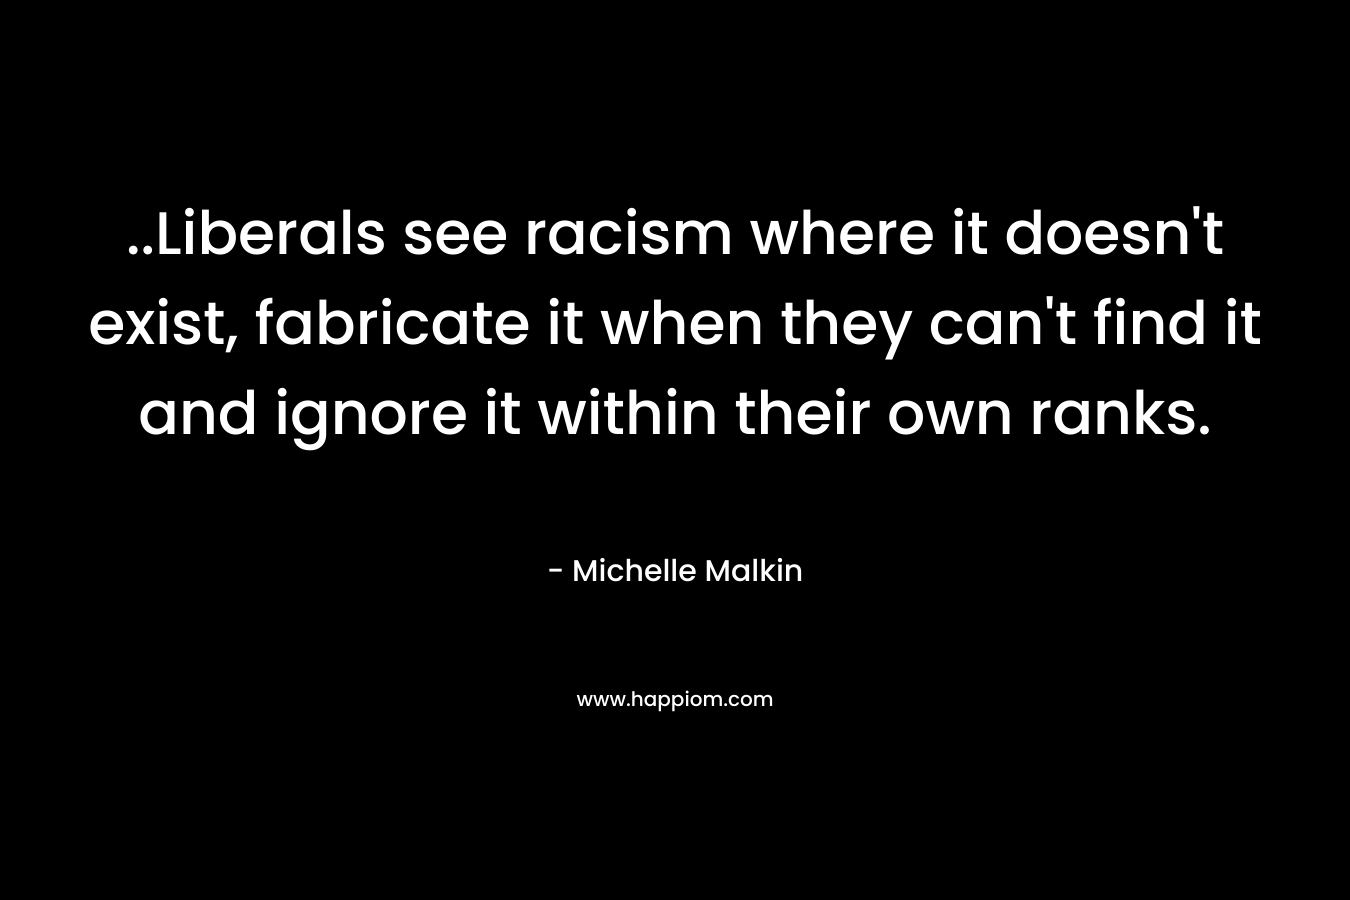 ..Liberals see racism where it doesn't exist, fabricate it when they can't find it and ignore it within their own ranks.